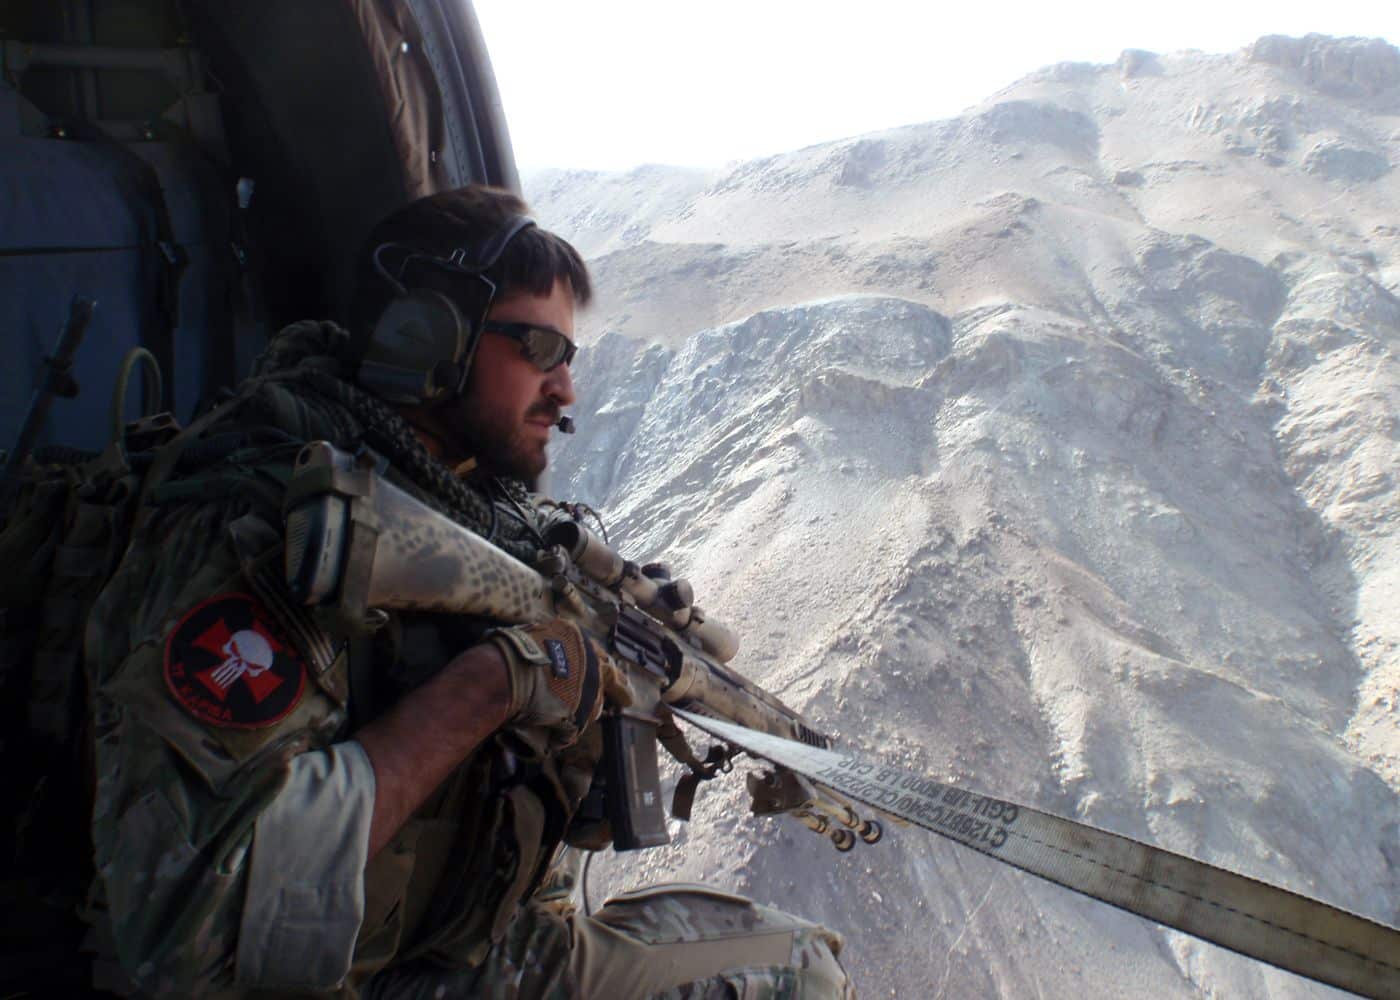 Tech. Sgt. Ted Hofknecht watches for insurgent activity from the side door of a helicopter in eastern Afghanistan. Hofknecht was honored at the Jewish Institute of National Security Affairs awards dinner